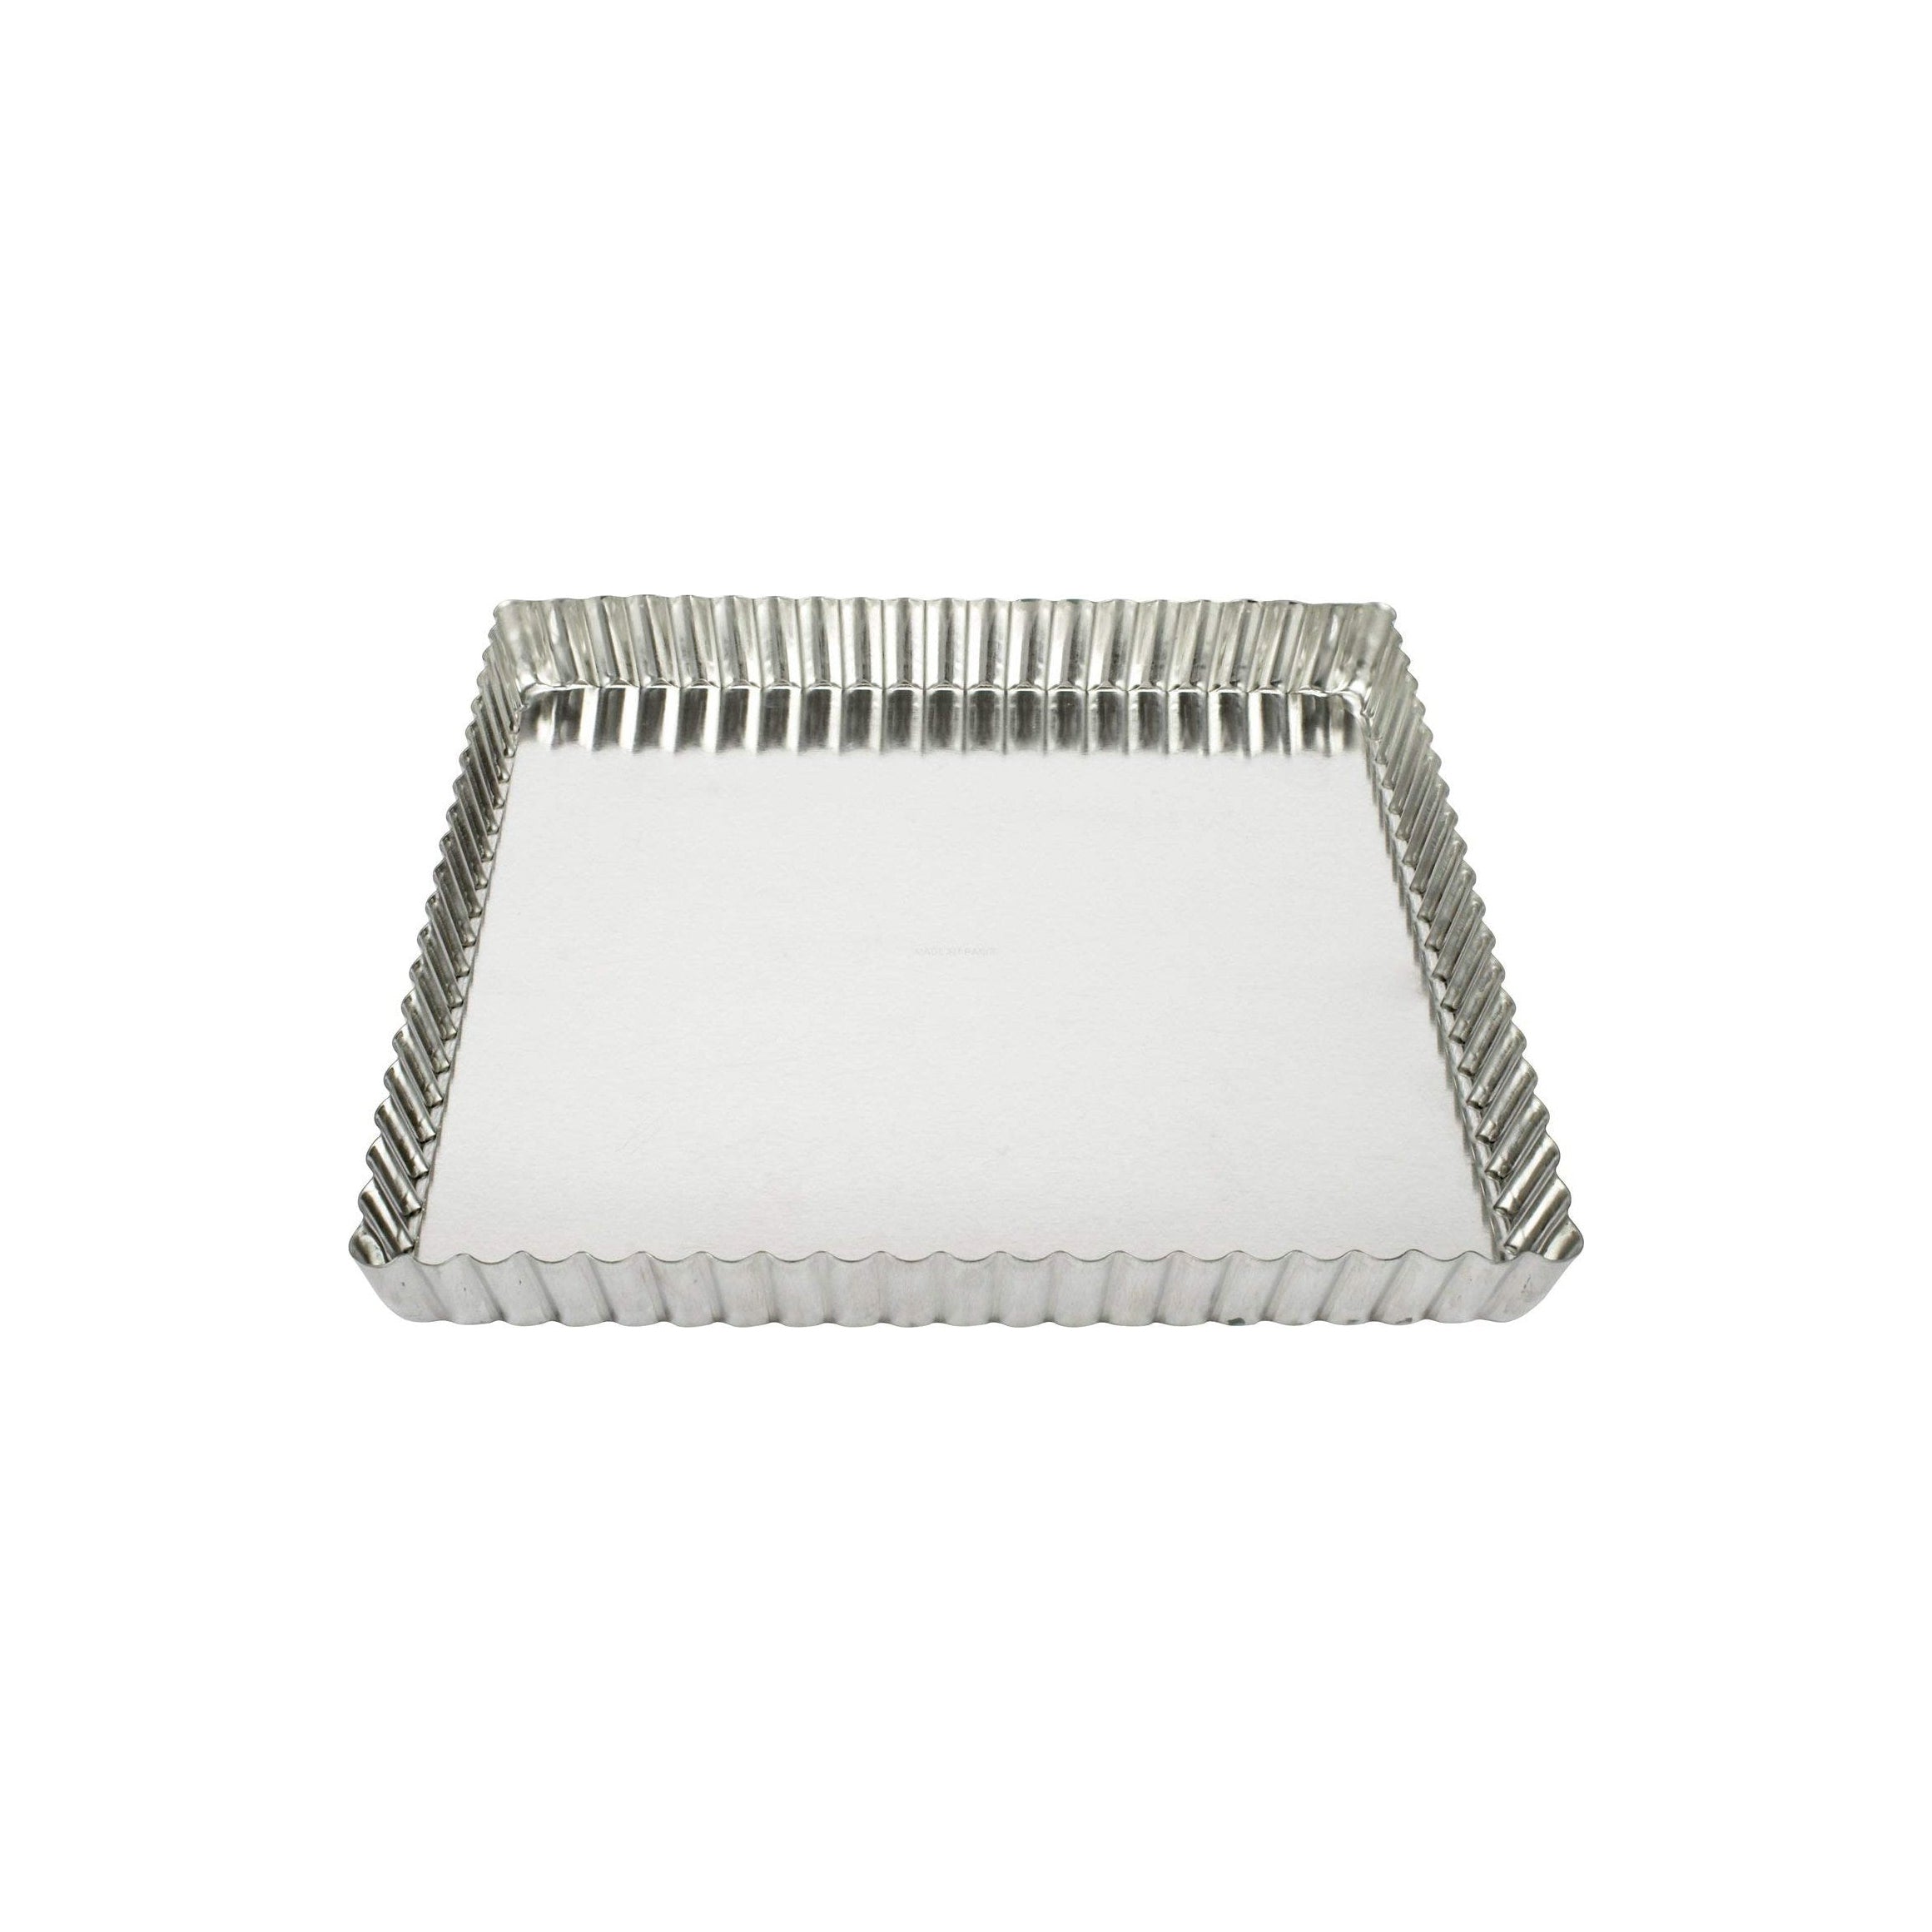 GOBEL Tin Fluted Square Tart/Quiche Mould with Removable Bottom, 9